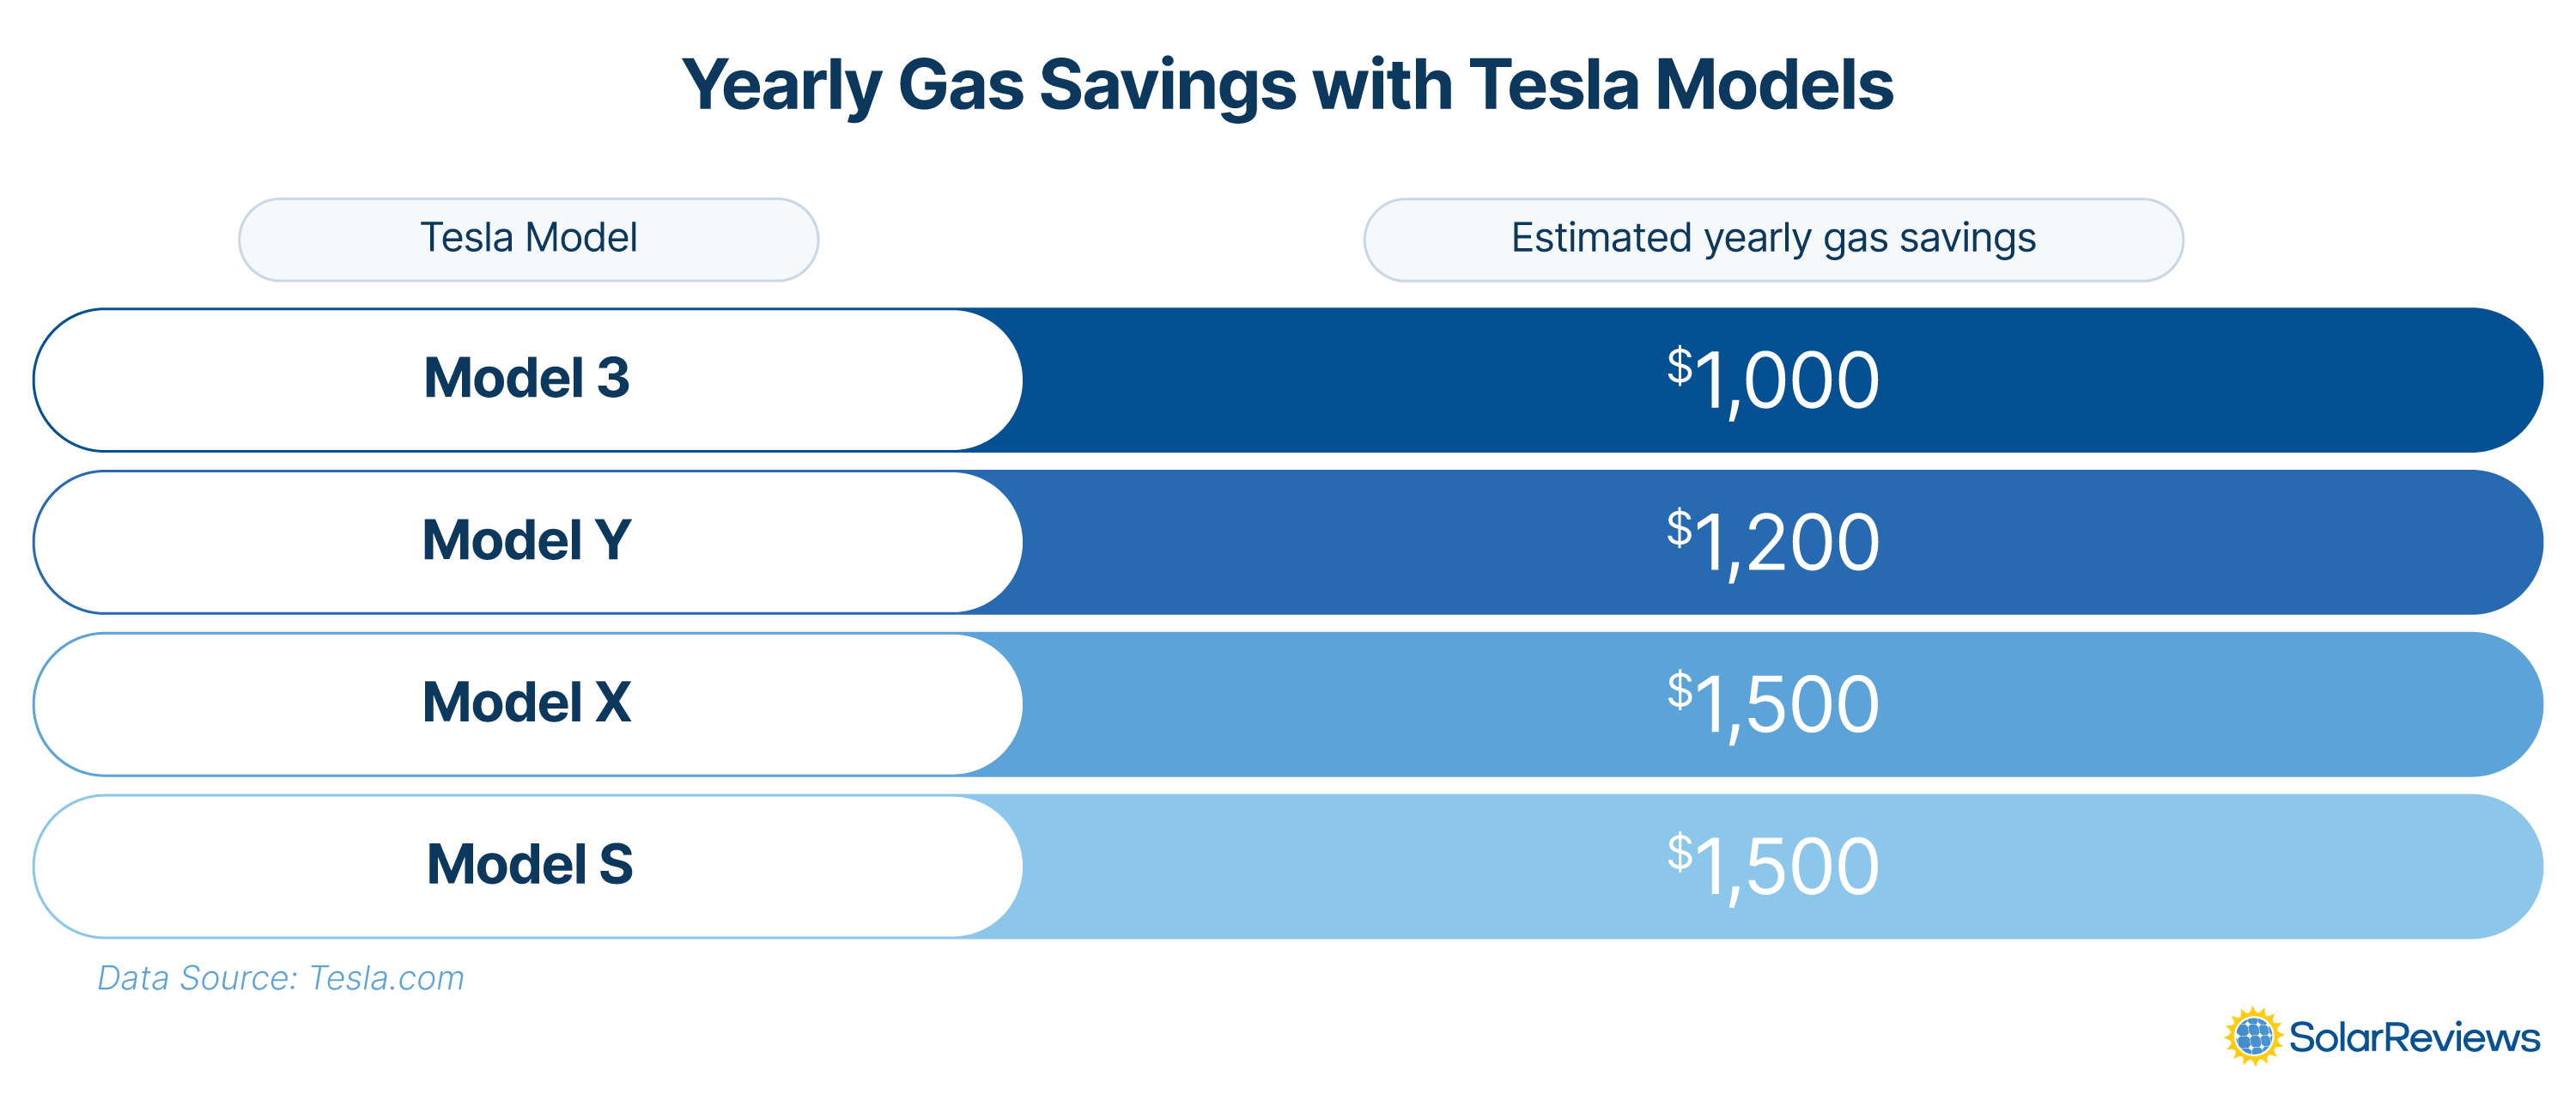 Graphic illustrating the estimated yearly gas savings of different Tesla Models: Model 3: $1,000 yearly savings, Model Y: $1,200 yearly savings, Model X: $1,500 yearly savings, Model S: $1,500 yearly savings.